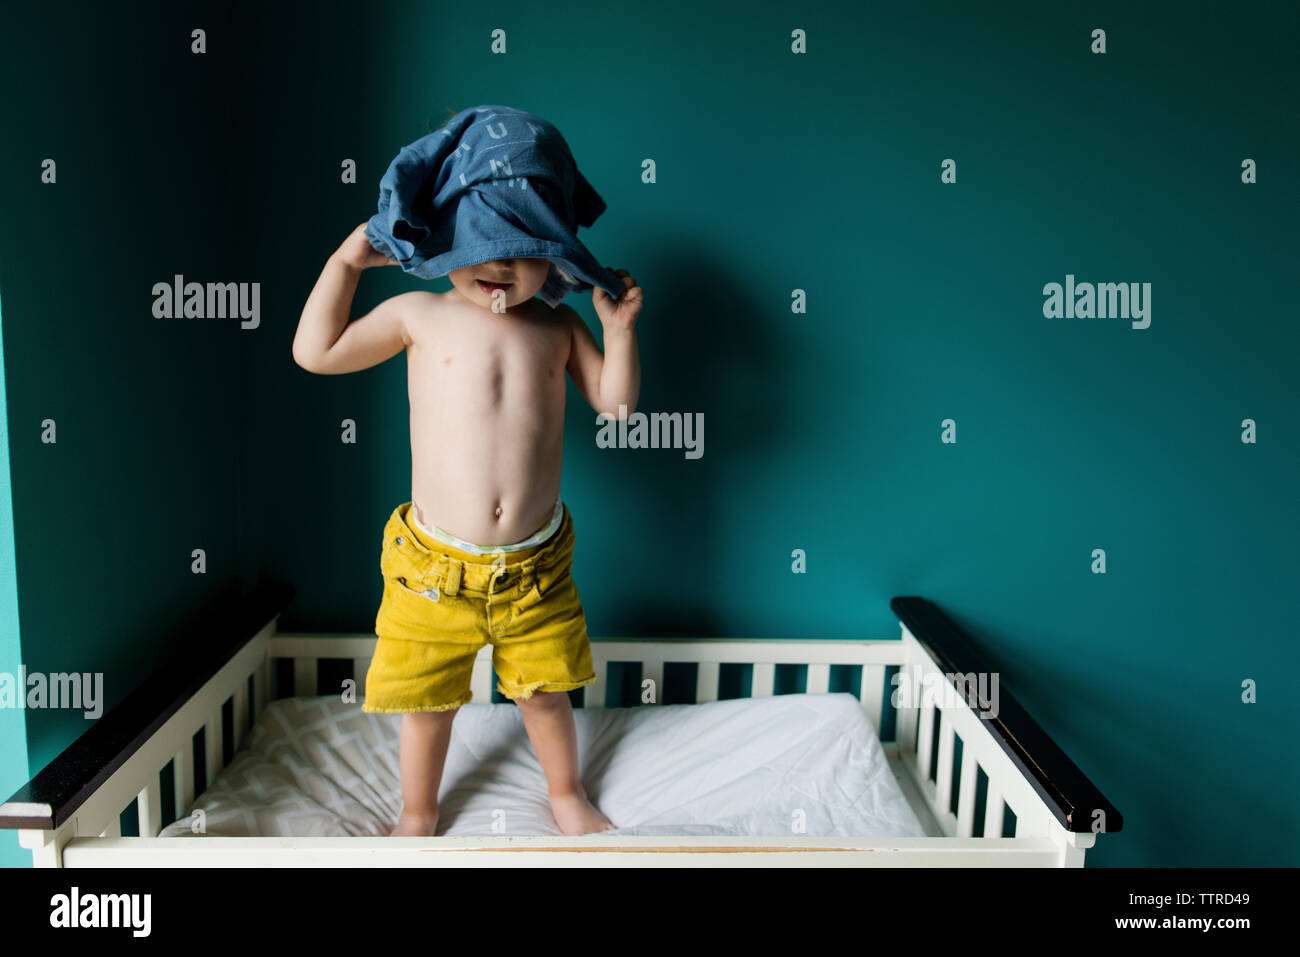 Boy removing shirt while standing in bunkbed against wall Stock Photo